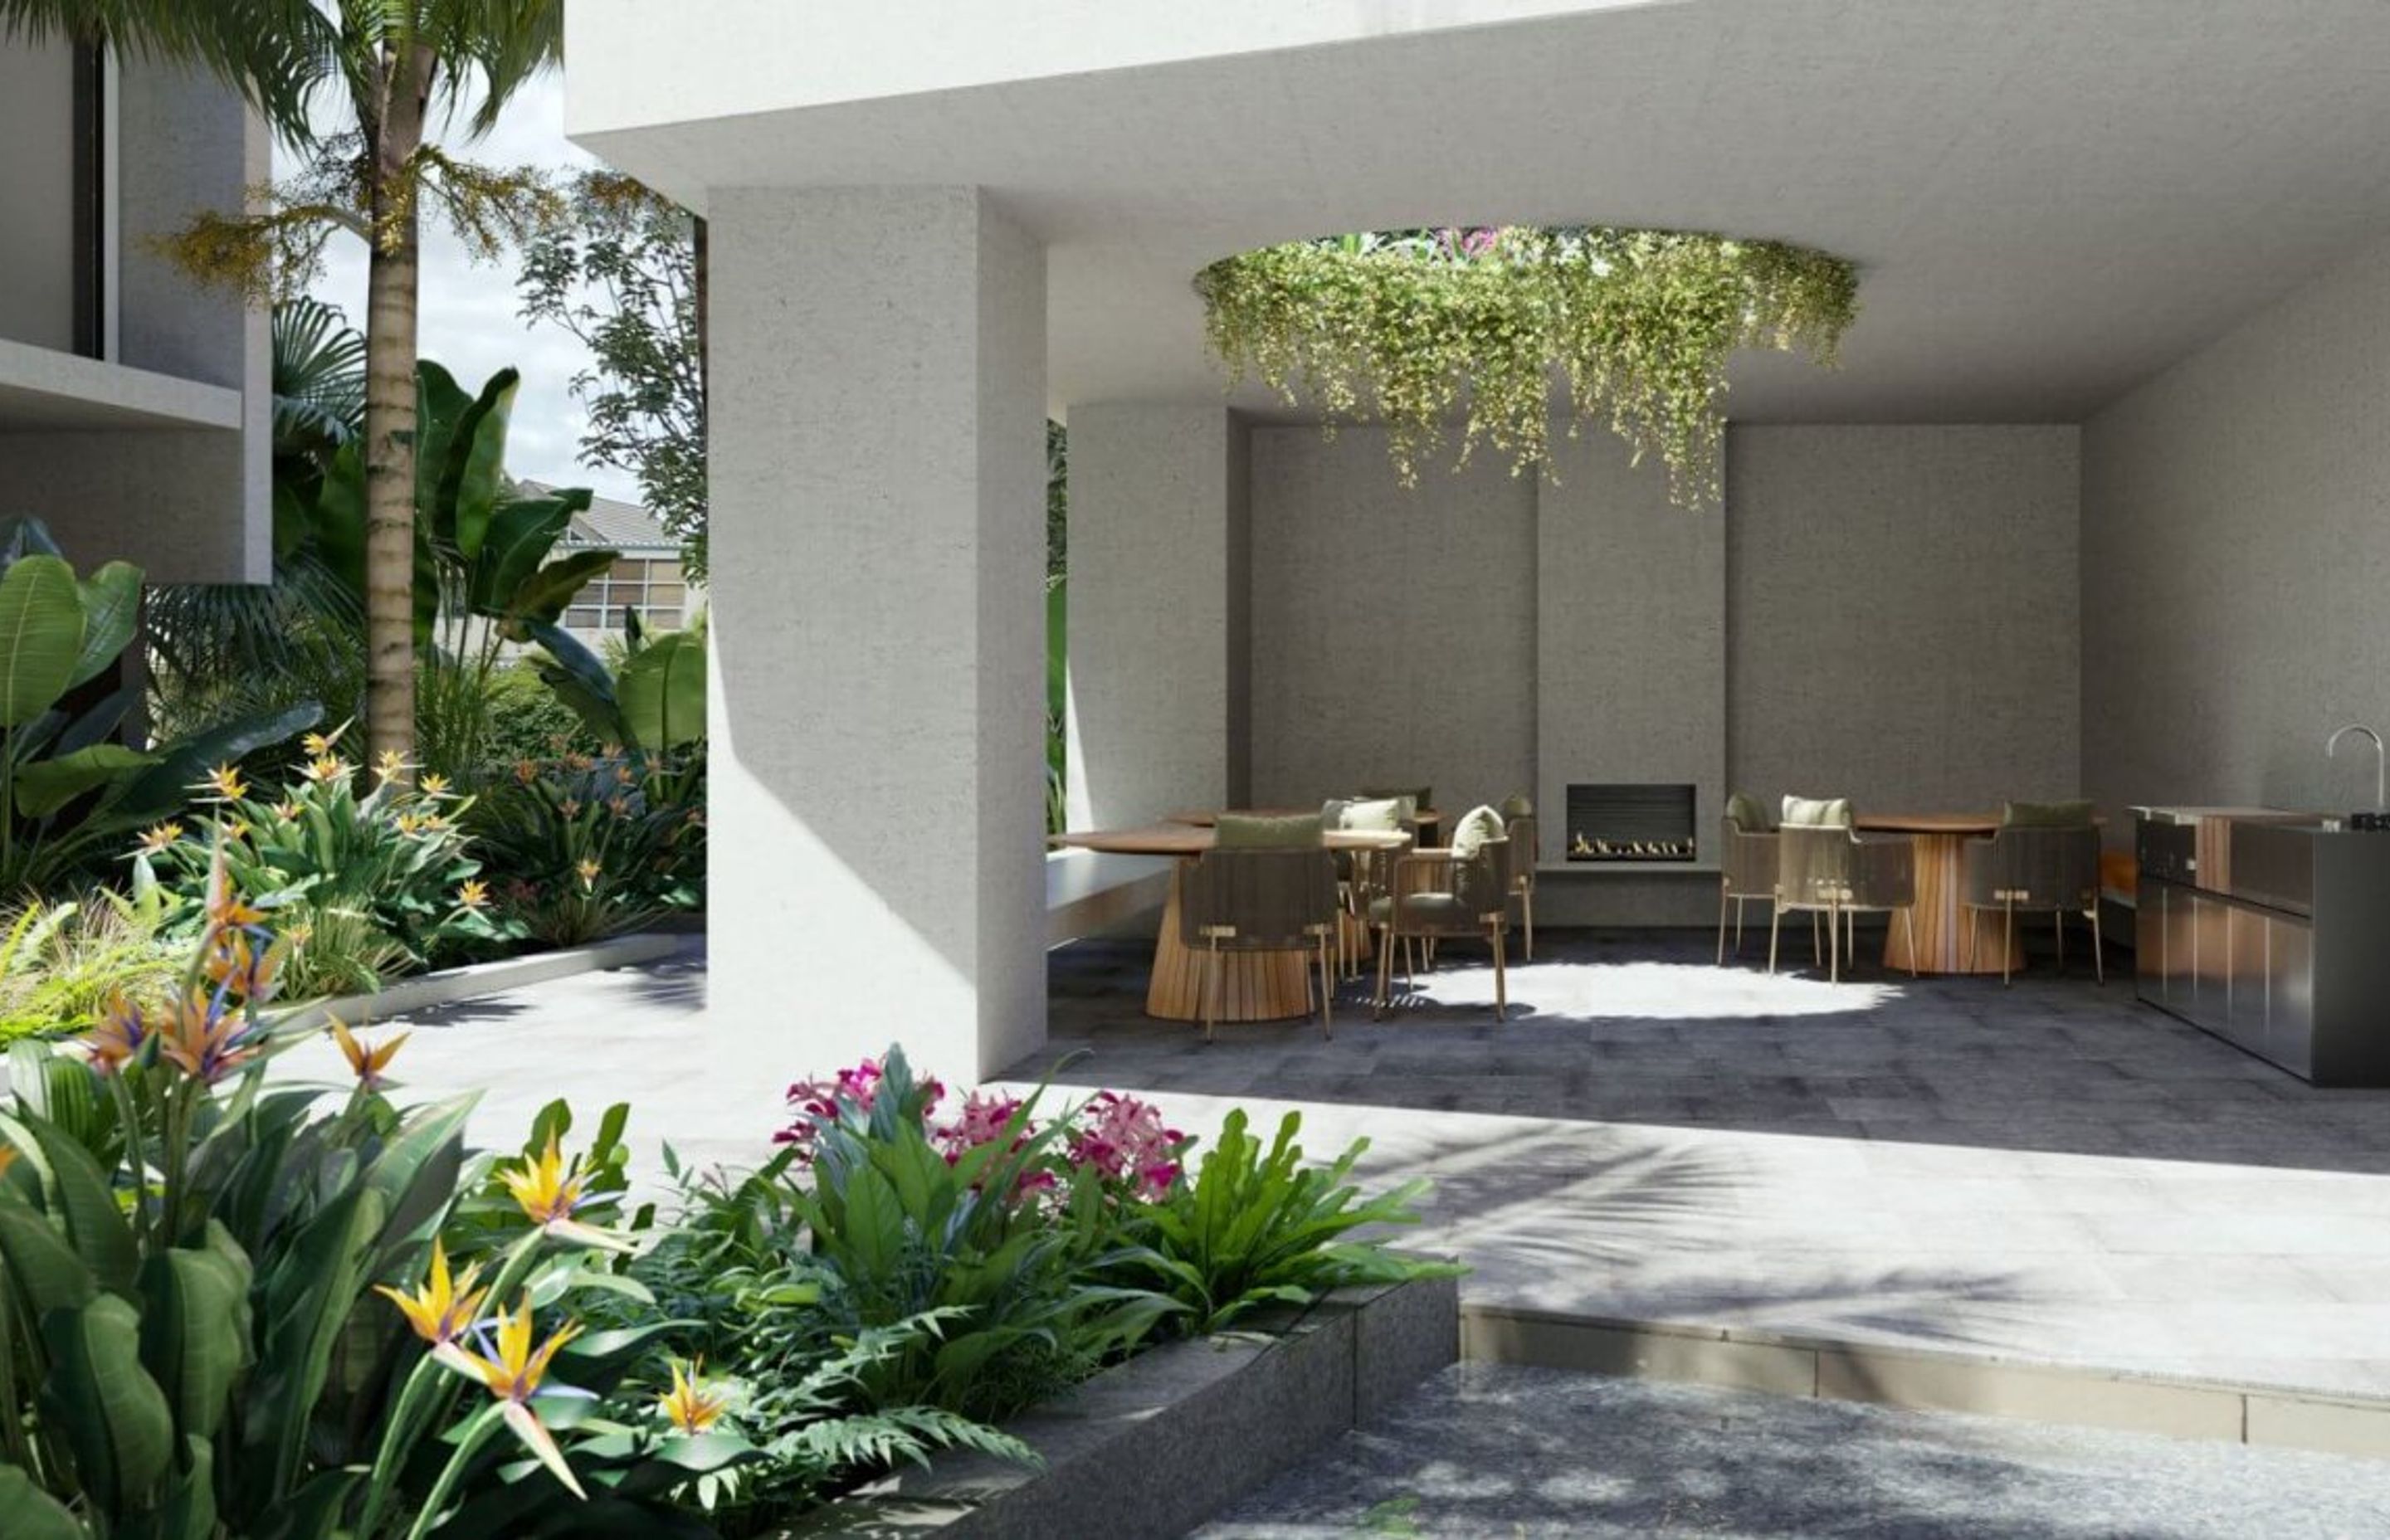 Greenery hangs down through a circular cut out in the roof of the poolside lounging and barbecue area.